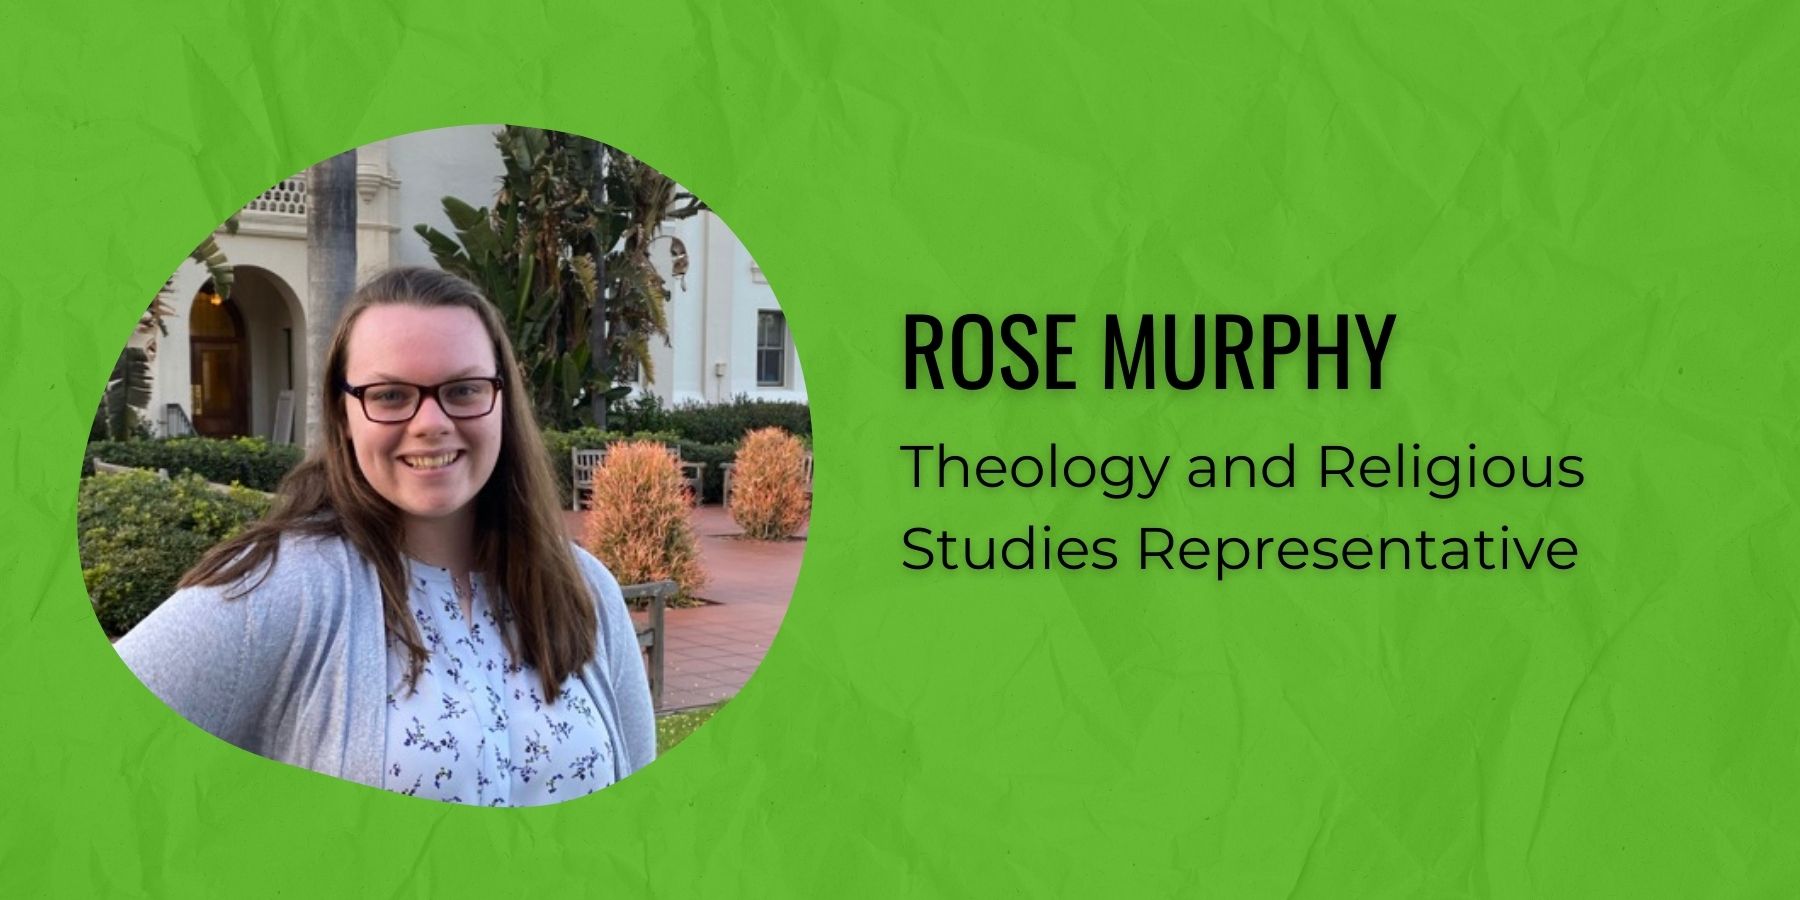 Photo of Rose Murphy and text: Theology and Religious Studies Representative